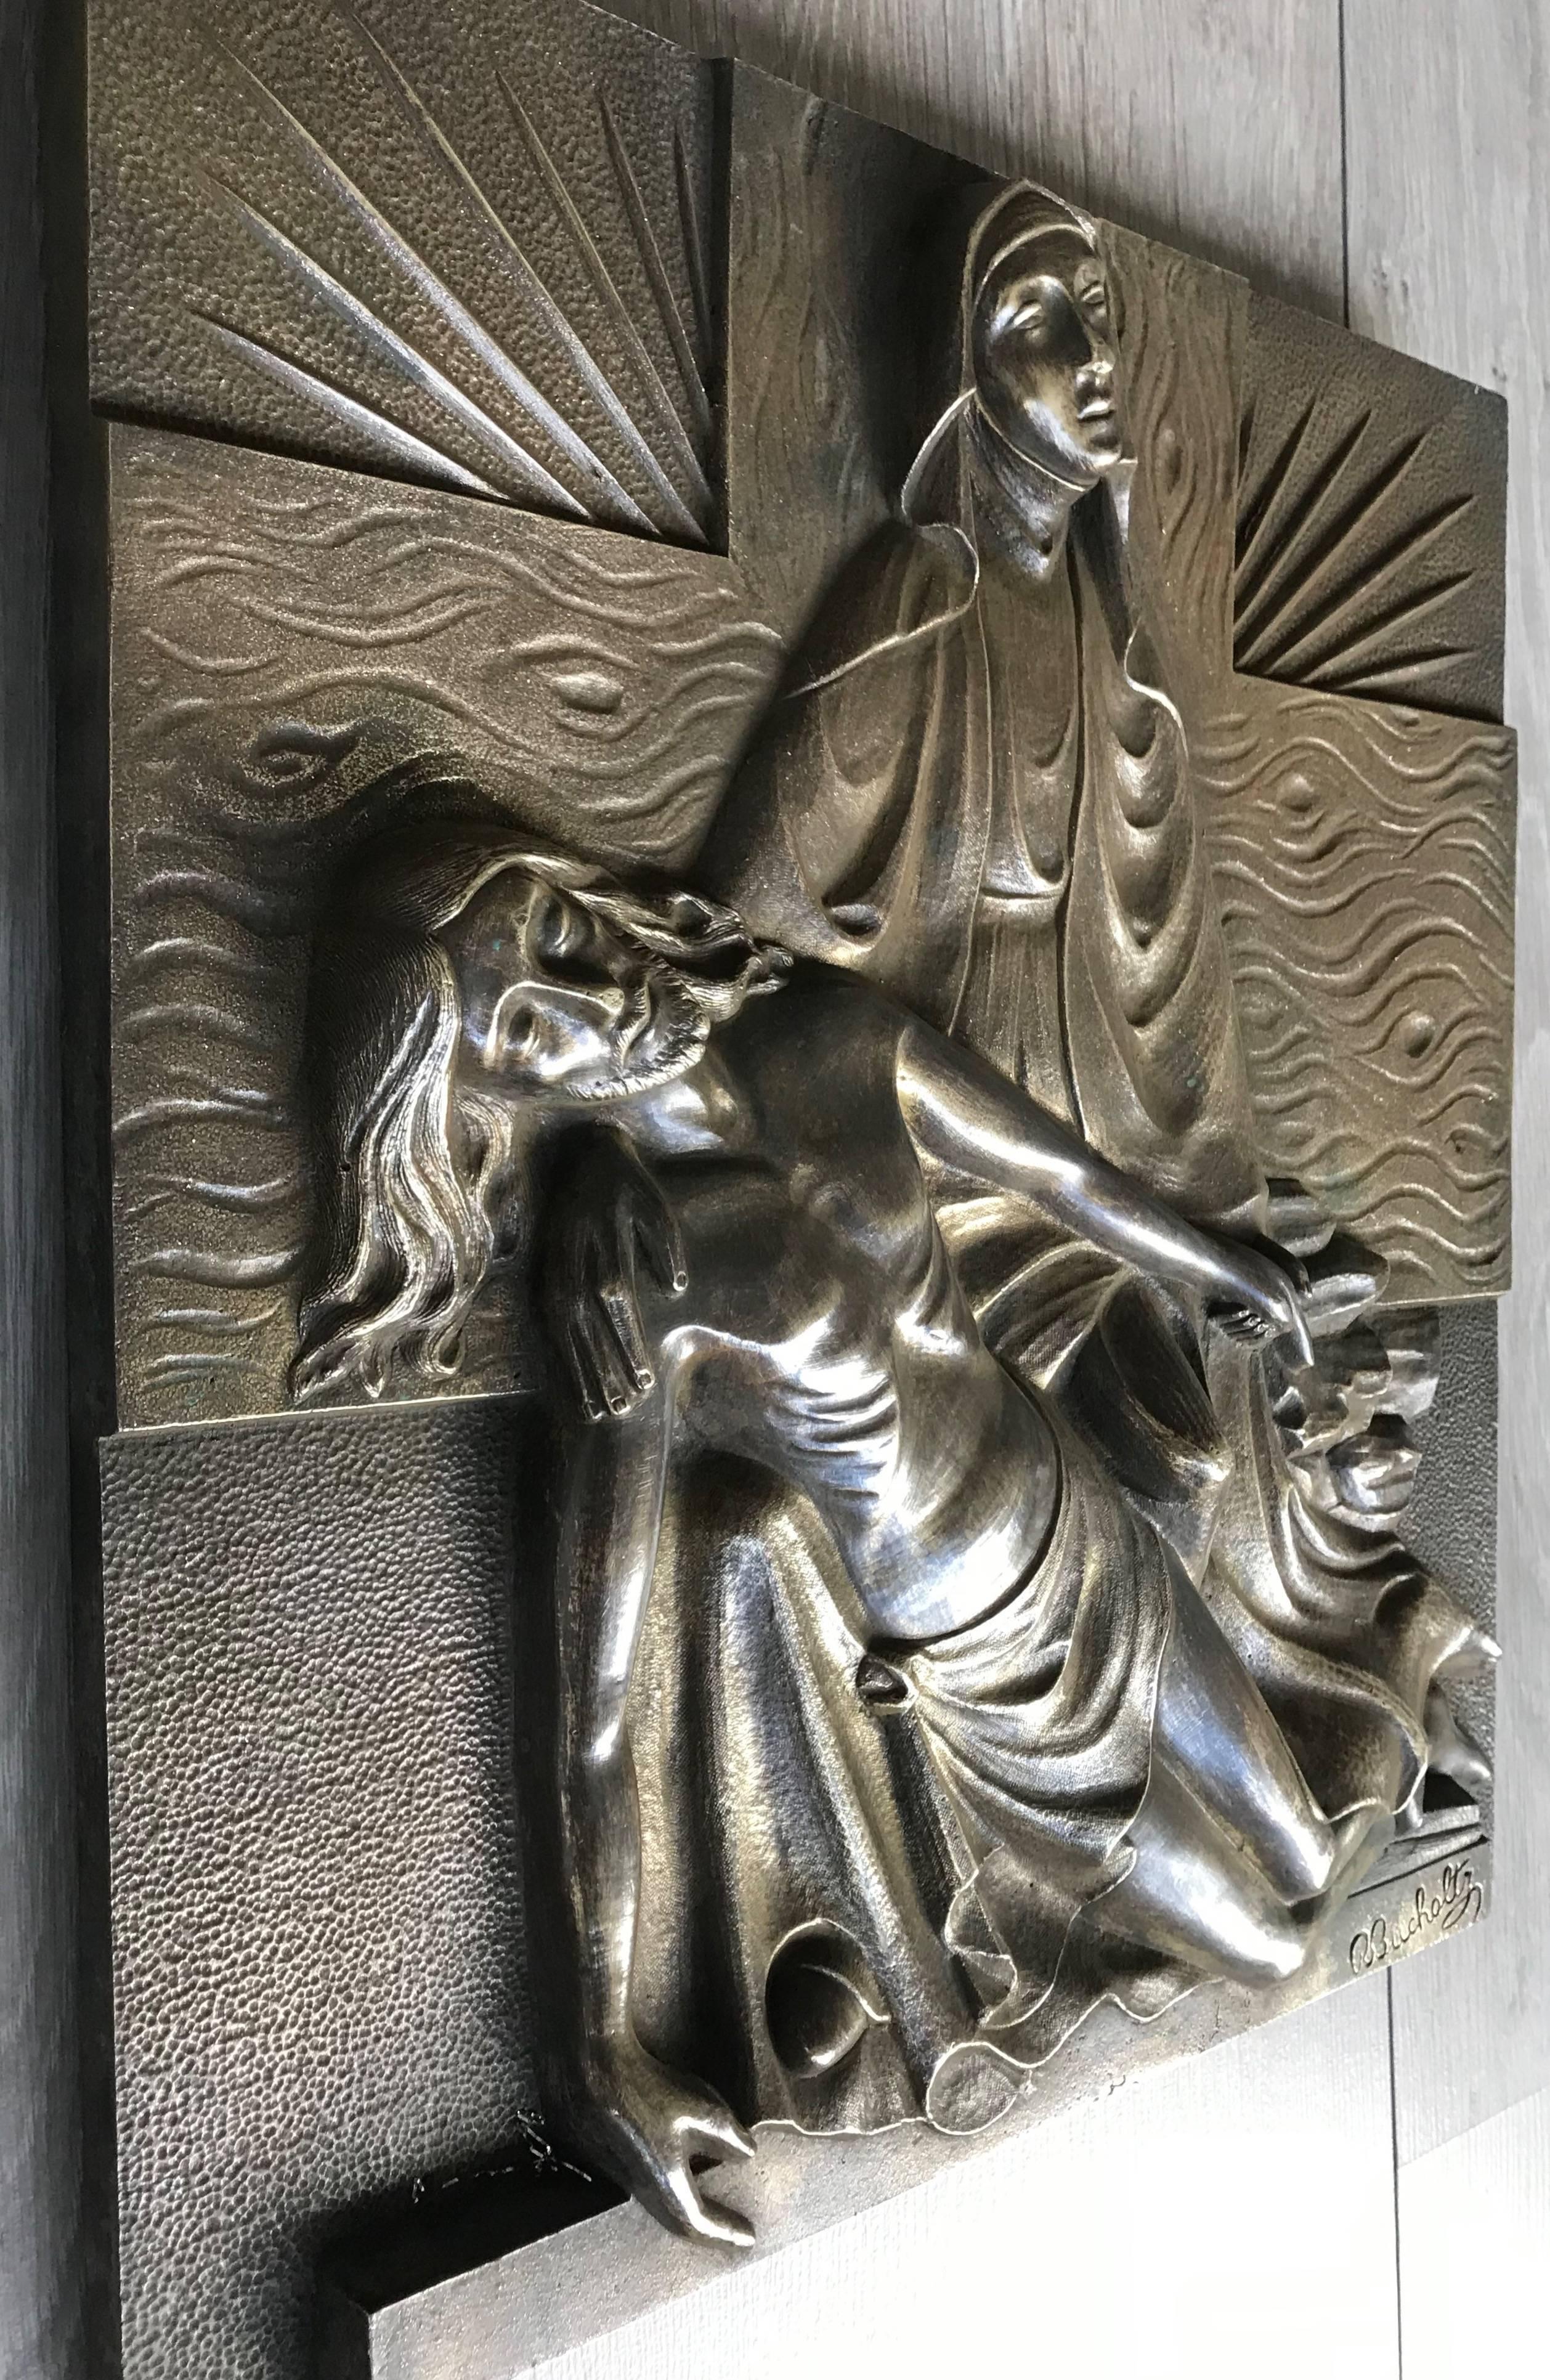 Heavy and finest quality, religious bronze wall plaque. 

This intense, bronze wall plaque depicts the Virgin Mary grieving over the body of Jesus Christ after the crucifixion. The holy light coming from the background and the intensity of this